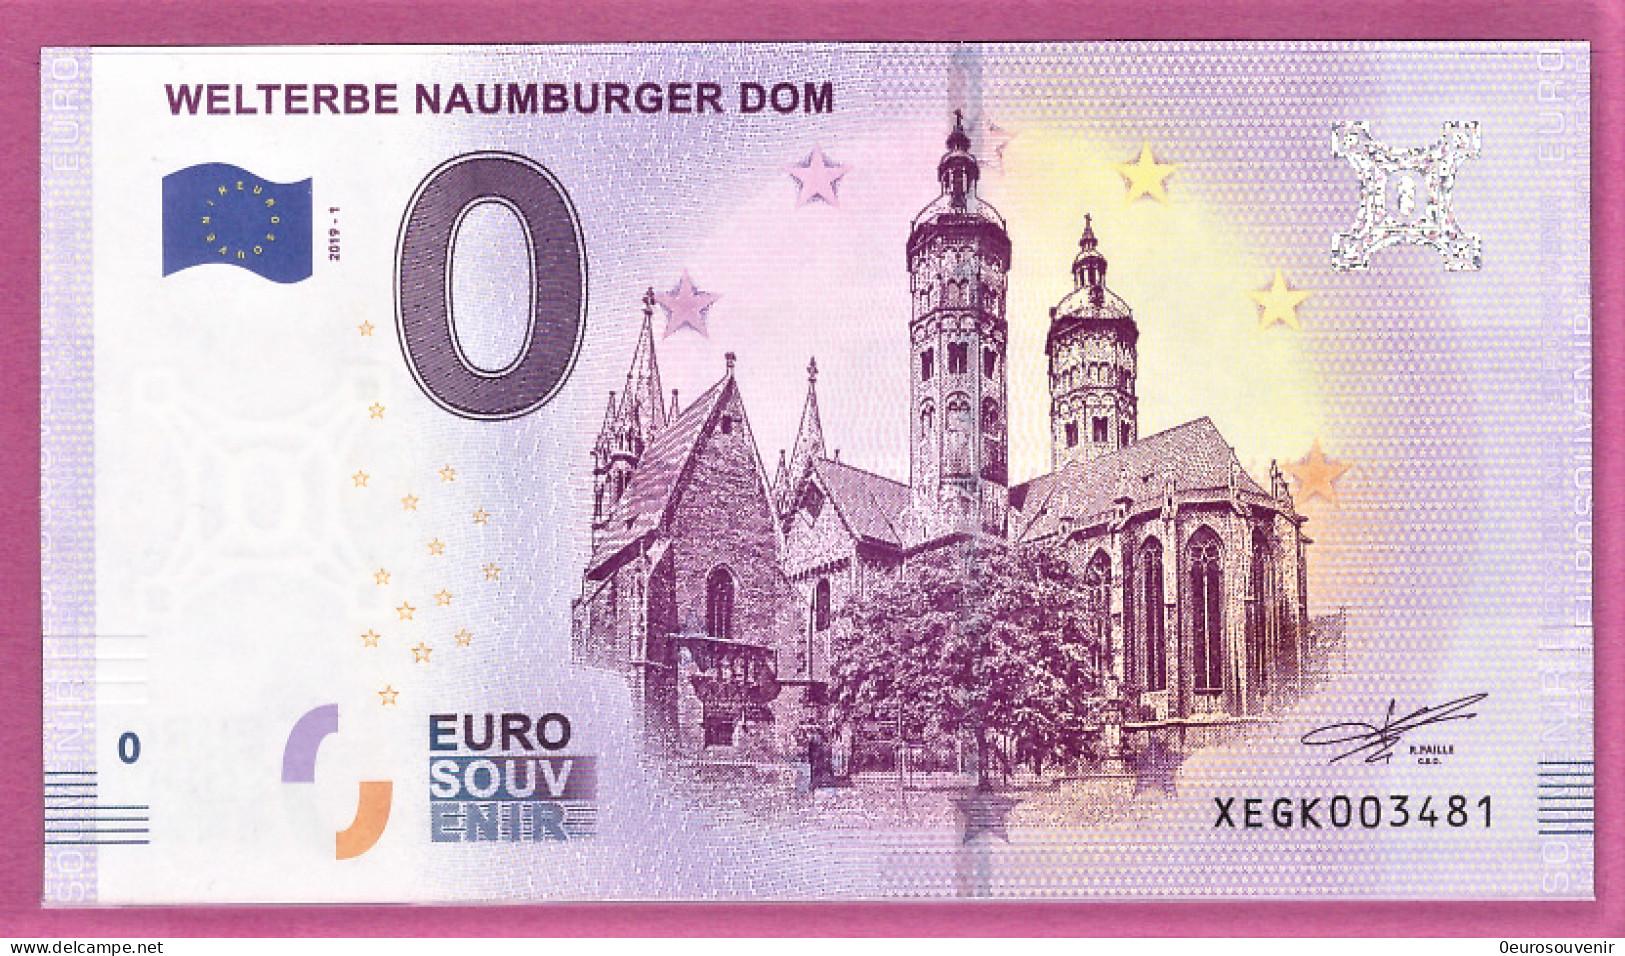 0-Euro XEGK 2019-1 WELTERBE NAUMBURGER DOM - Private Proofs / Unofficial